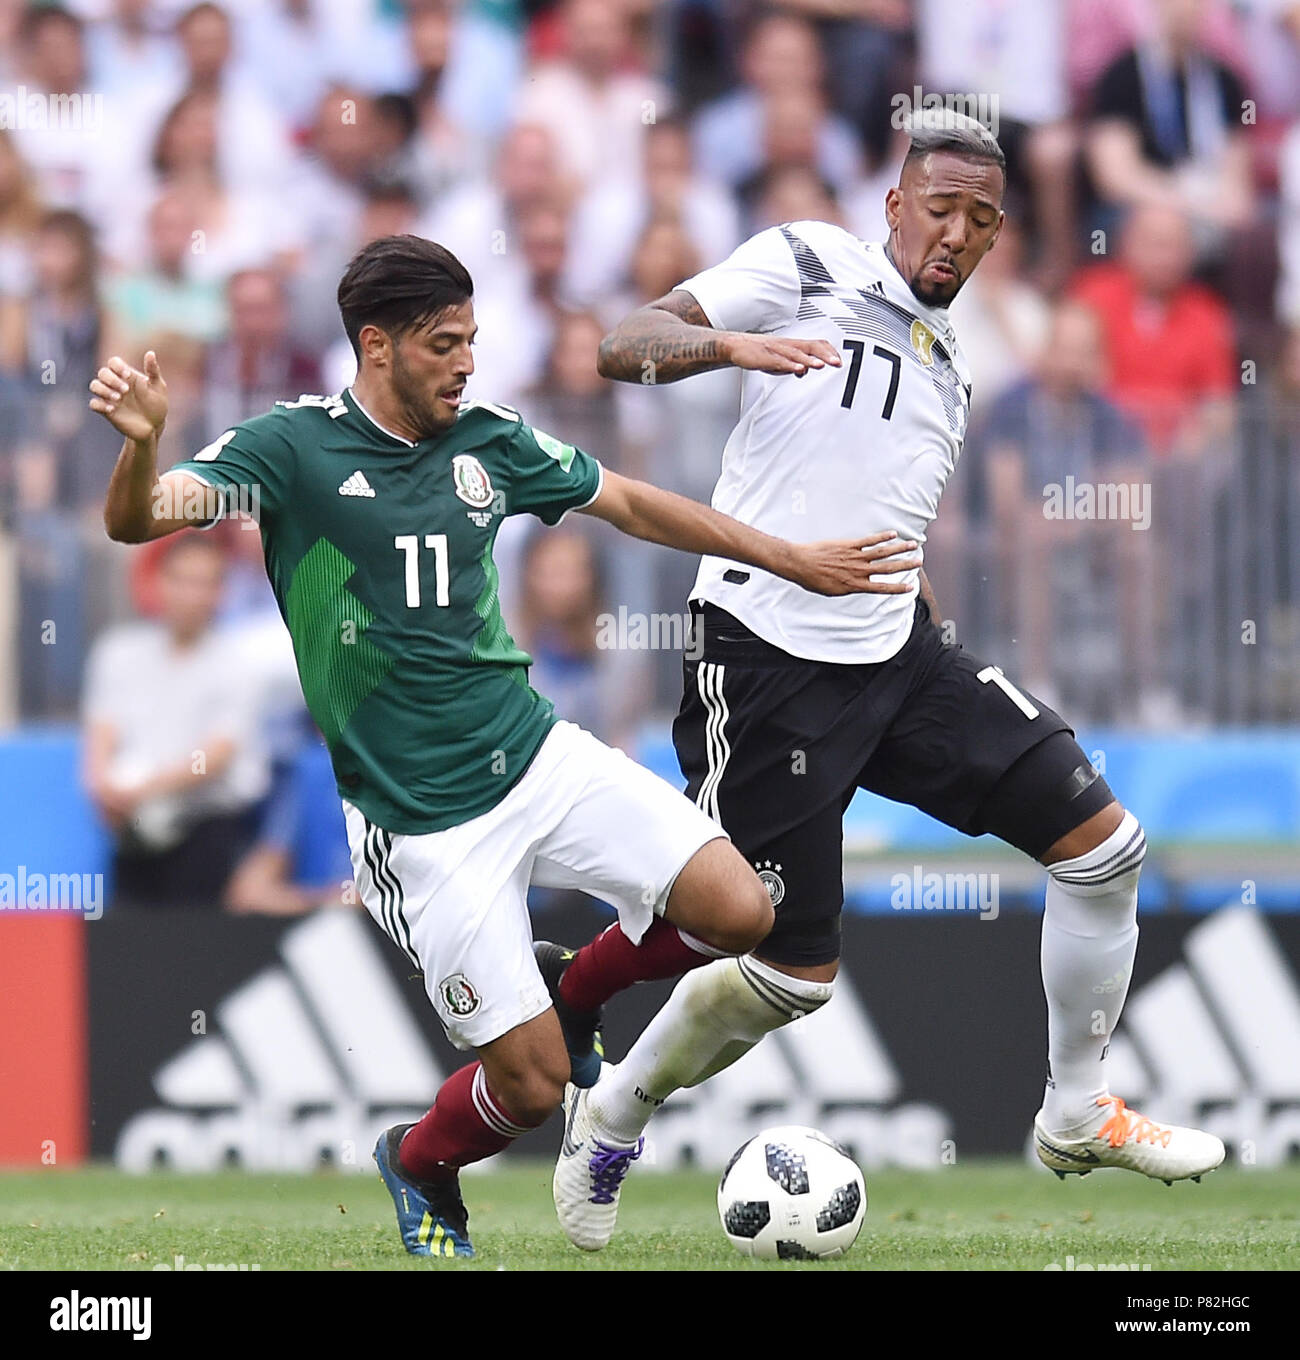 MOSCOW, RUSSIA - JUNE 17: Carlos Vela of Mexico competes with Jerome Boateng of Germany during the 2018 FIFA World Cup Russia group F match between Germany and Mexico at Luzhniki Stadium on June 17, 2018 in Moscow, Russia. (Photo by Lukasz Laskowski/PressFocus/MB Media) Stock Photo